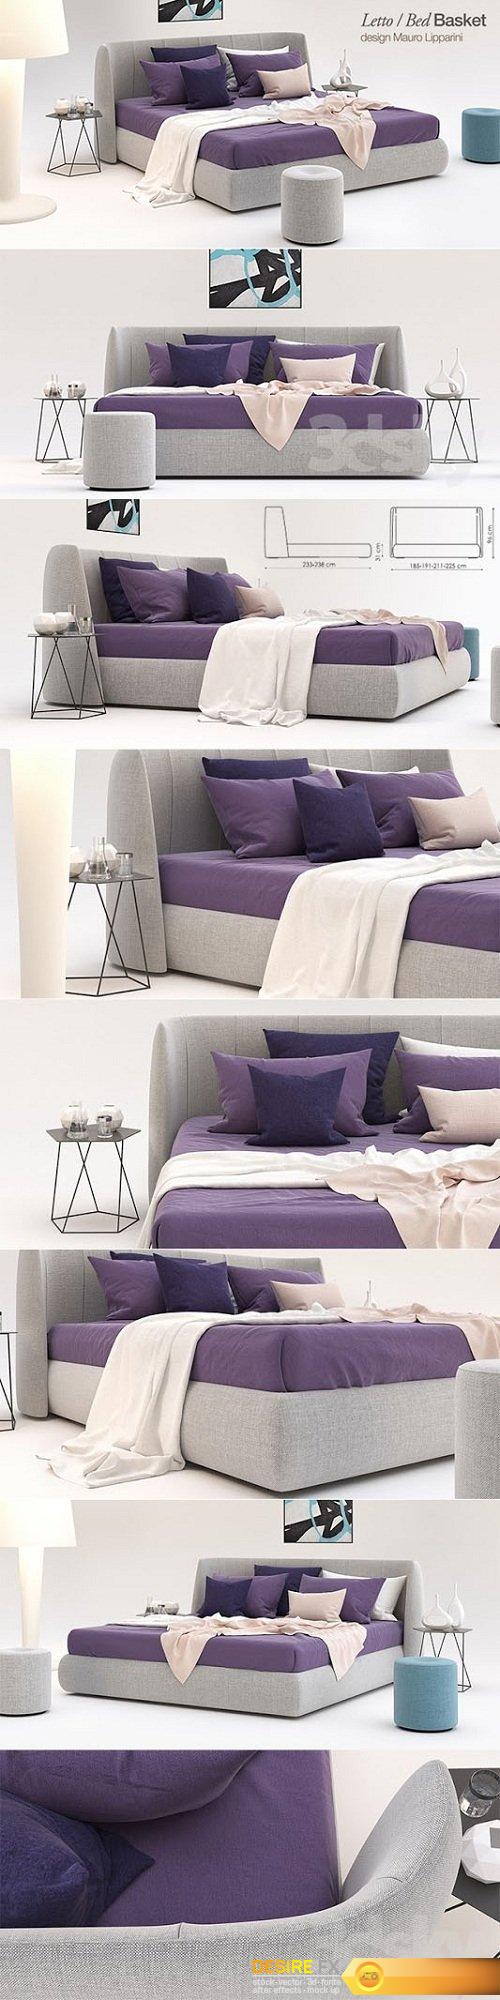 Letto Bed Basket